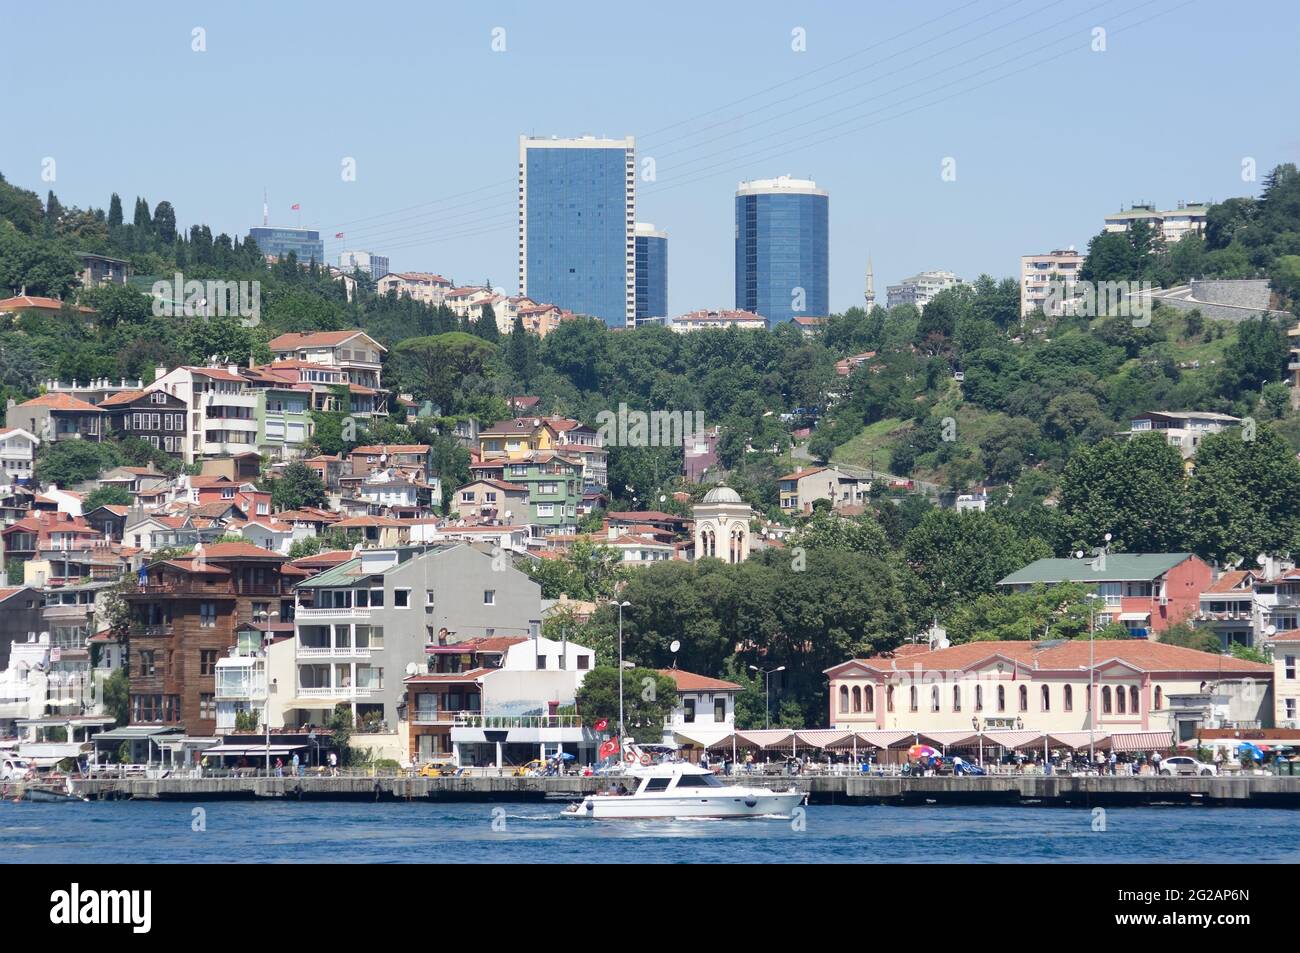 the Arnavutkoy village on the Bosporus waterfront is a historic neighborhood in Istanbul on the background the skyscrapers of modern Levent neighborho Stock Photo